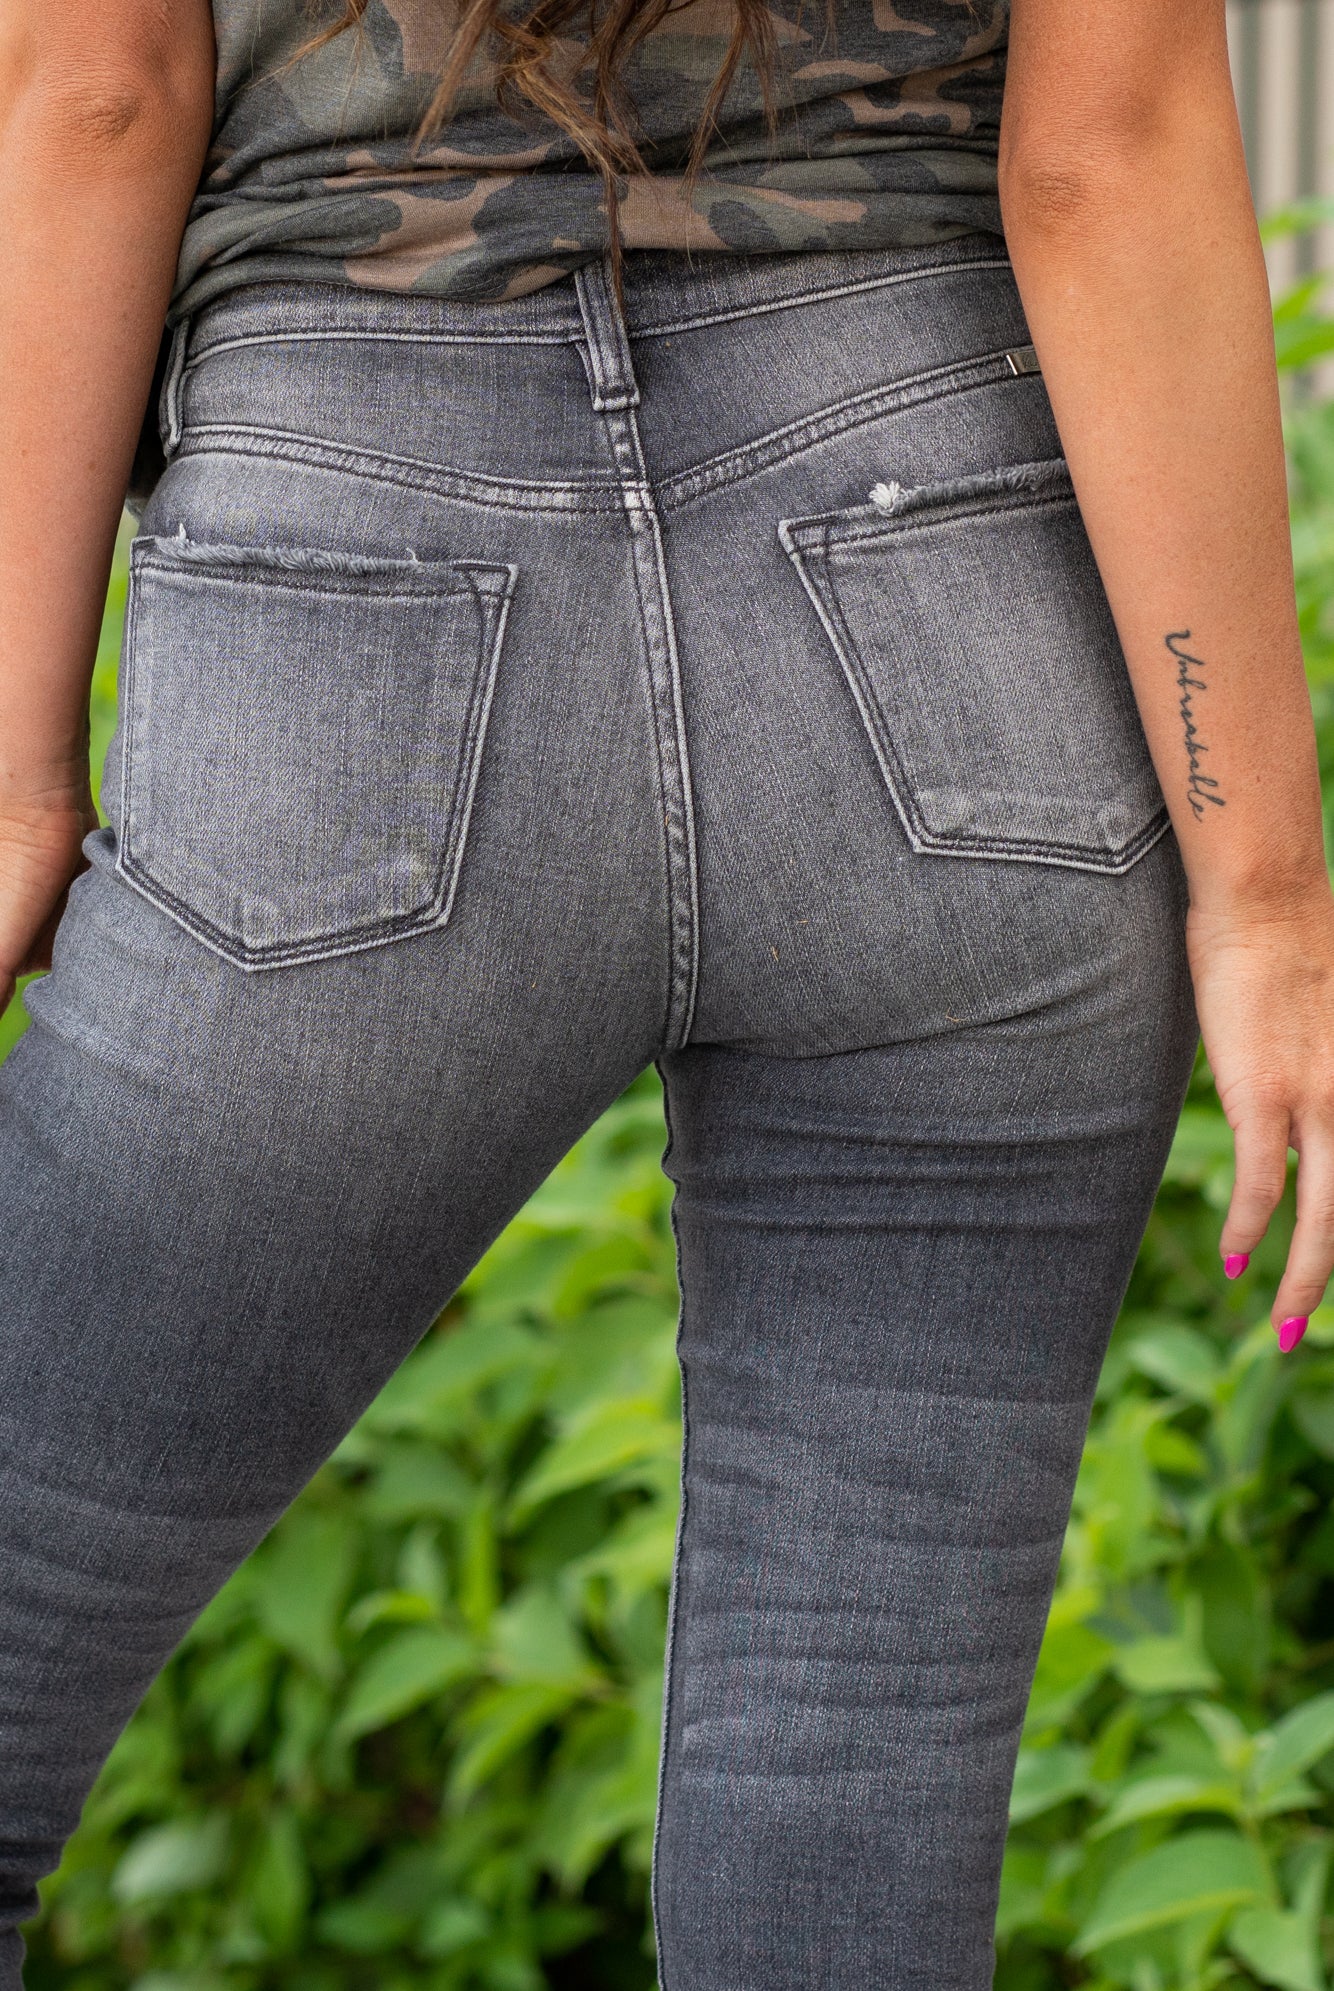 KanCan Jeans Color: Gray Ankle Skinny, 26.5" Inseam* High Rise, 10.5" Front Rise* Fray Hem Ankle 93% COTTON , 6% POLYESTER , 1% SPANDEX Fly: Zipper Style #: BM8395HGDG Contact us for any additional measurements or sizing.    *Measured on the smallest size, measurements may vary by size. 